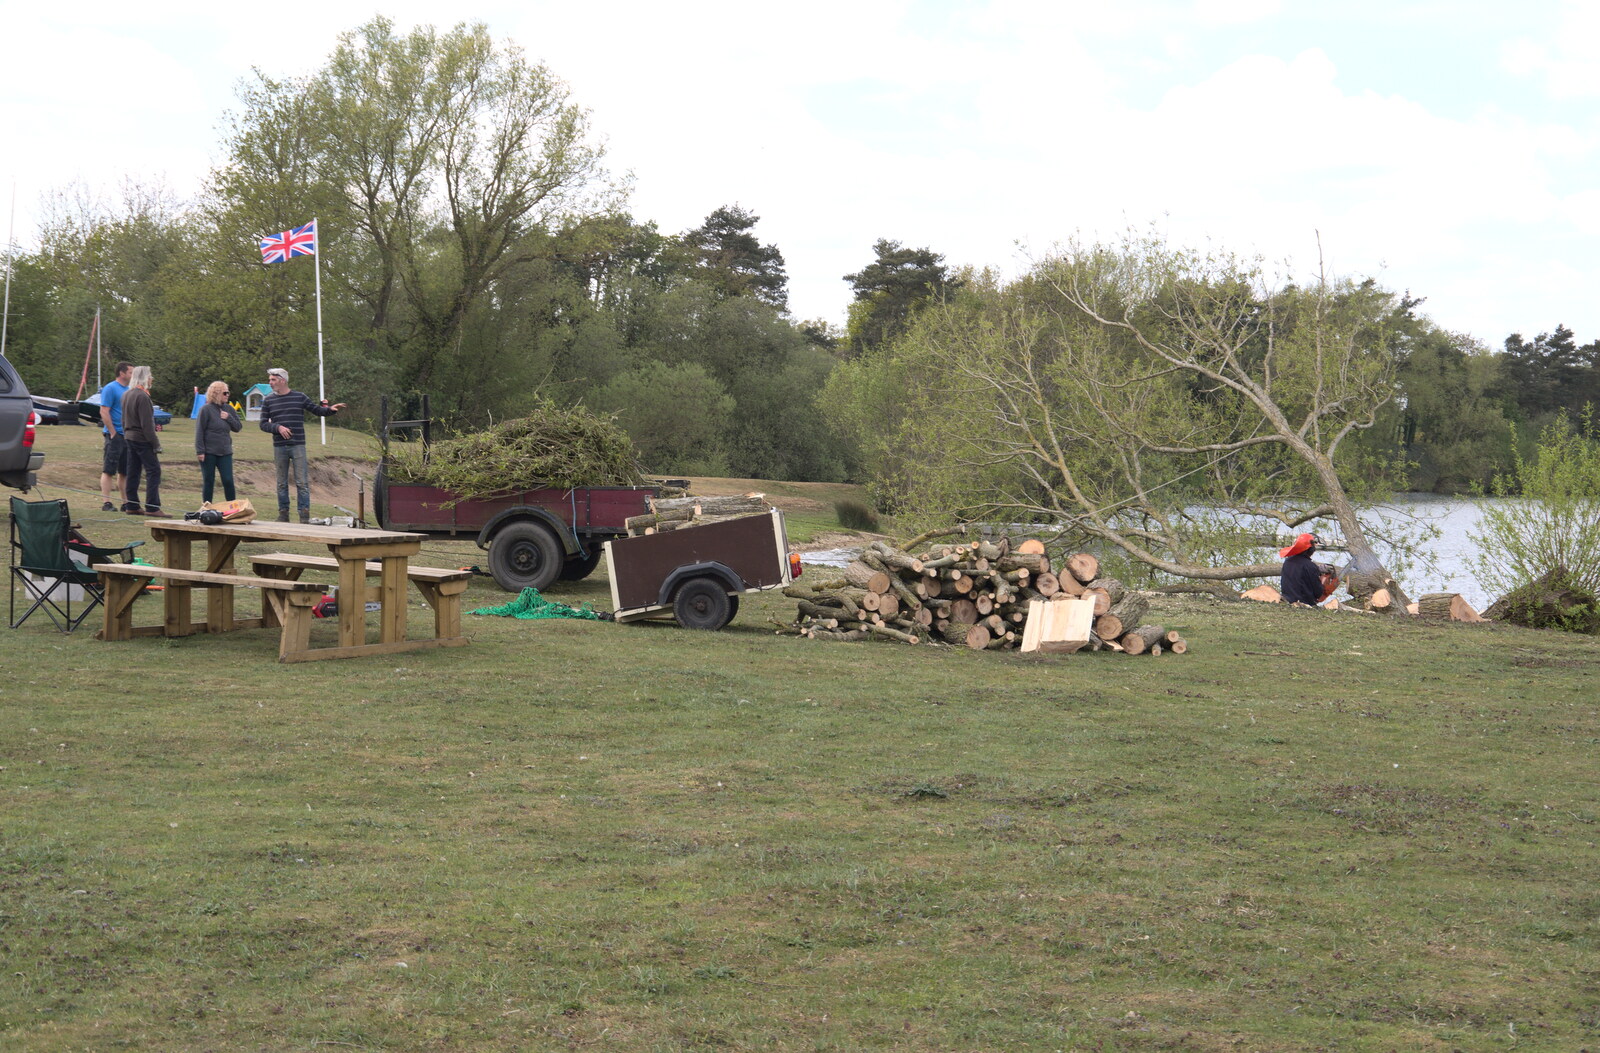 The Canoe's First Outing, Weybread Lake, Harleston - 1st May 2022: The climbey tree has been chopped down